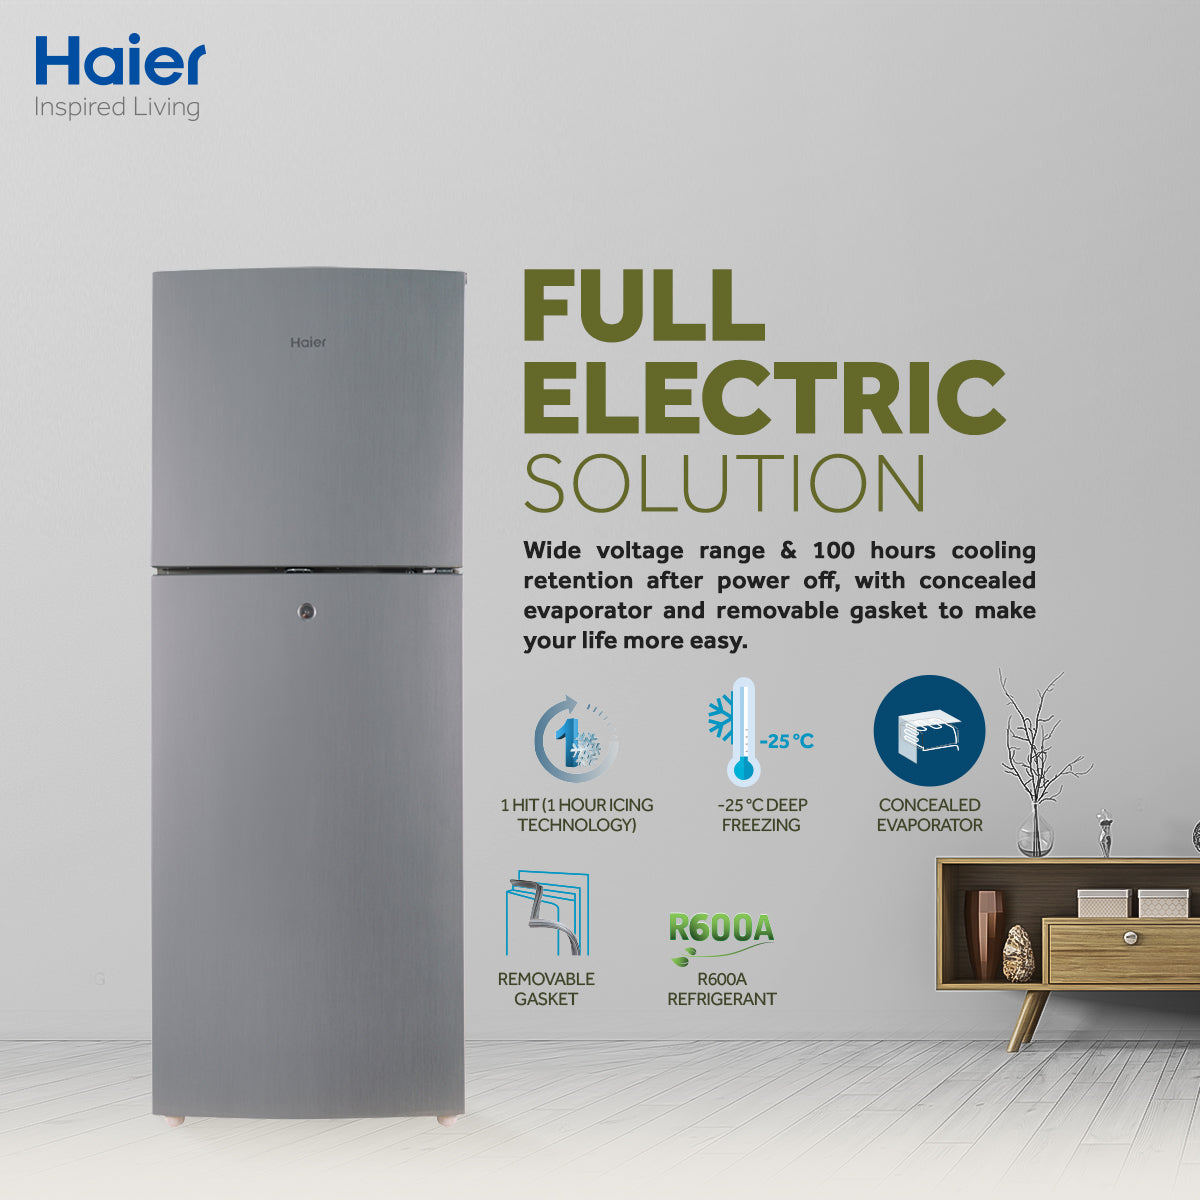 Haier Refrigerators 11 Cu Ft-E-Star Series-HRF-306 EBS-Deepest Freeze-Direct Cool-1 Hour Icing Technology-Wide Voltage-Glass Door-10 Years Warranty